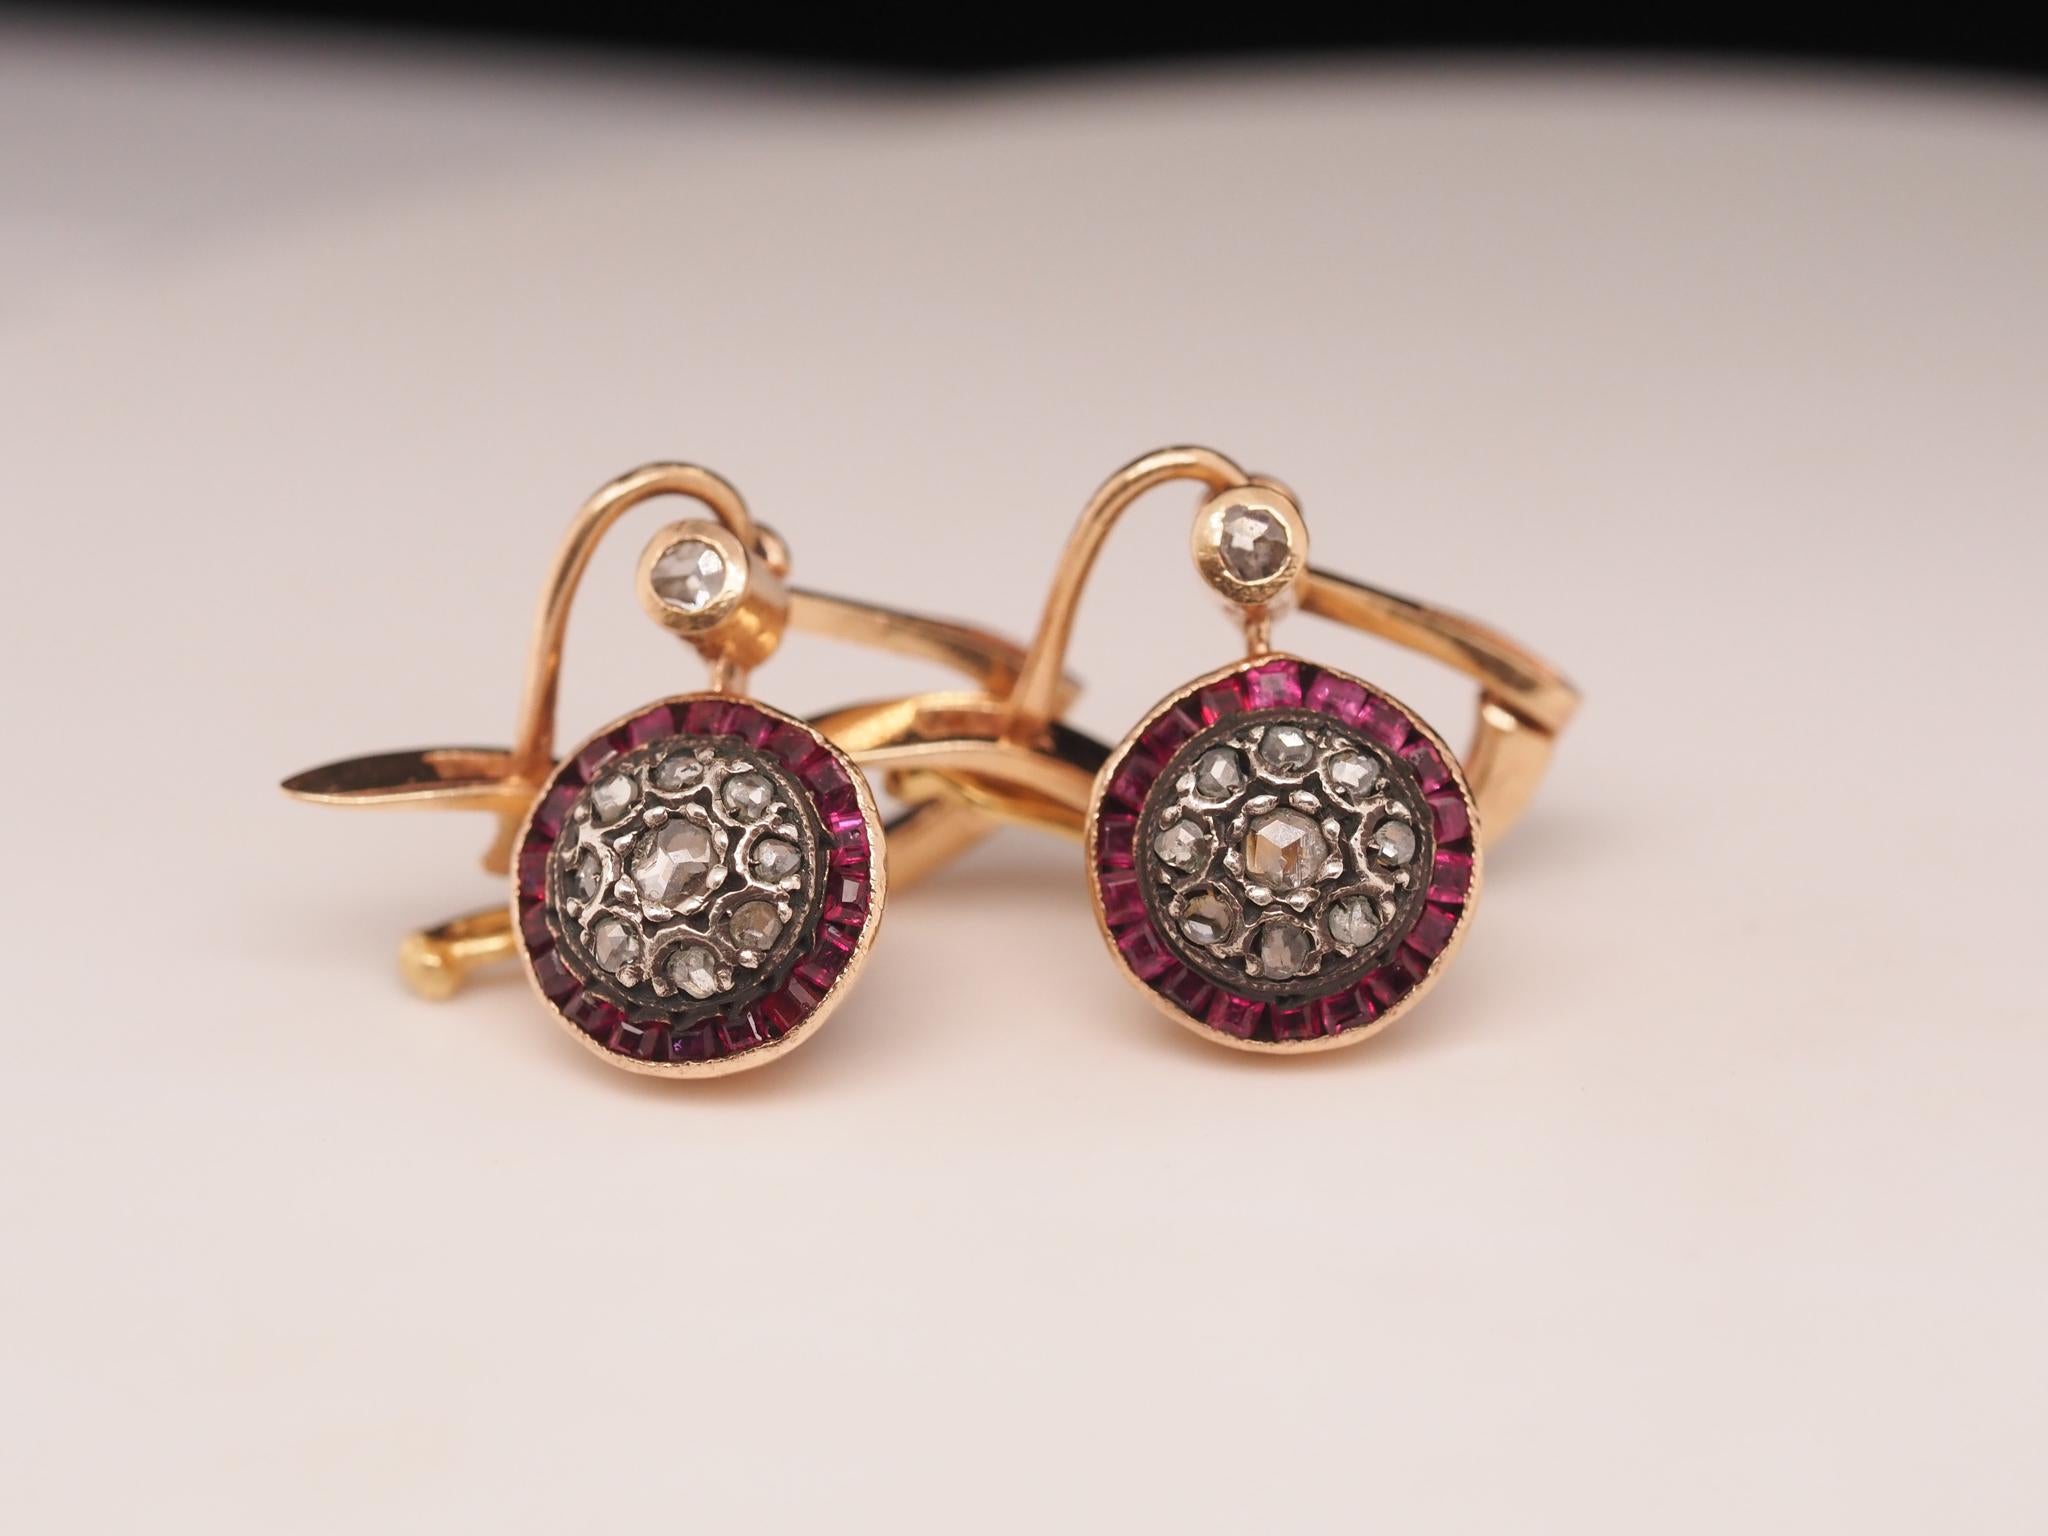 Circa 1930s Art Deco Ruby and Rose Cut Diamond Earrings For Sale 2